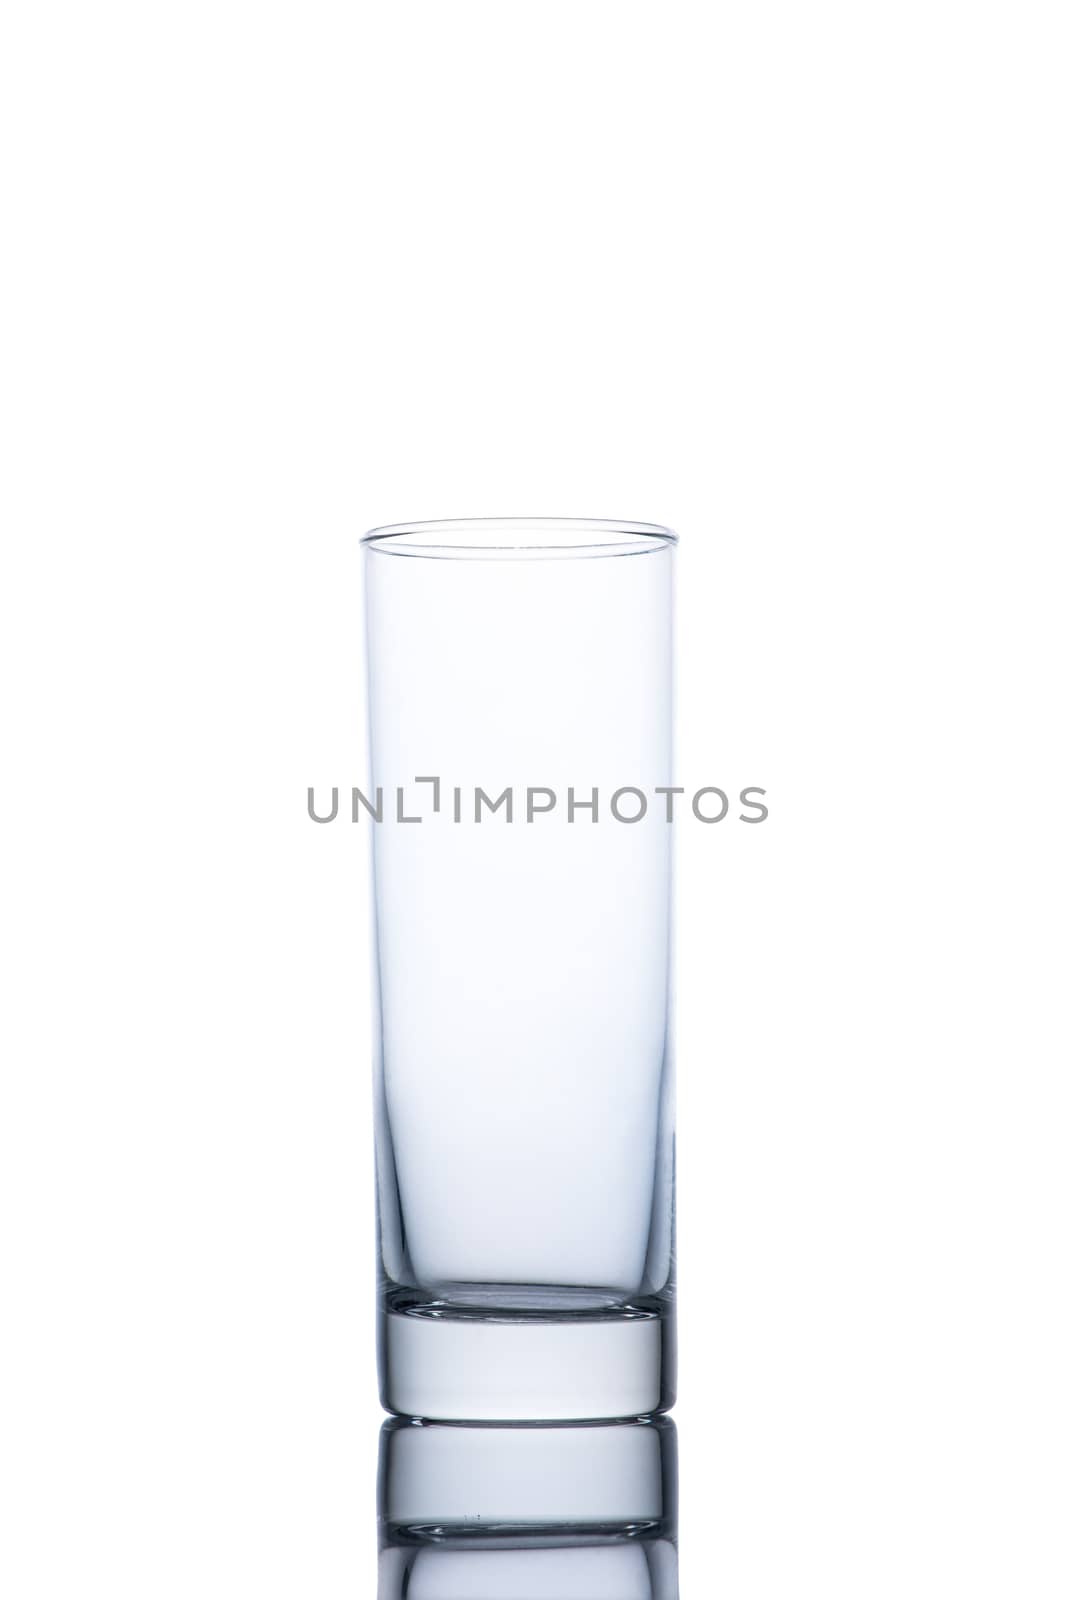 water glass isolated with clipping path included